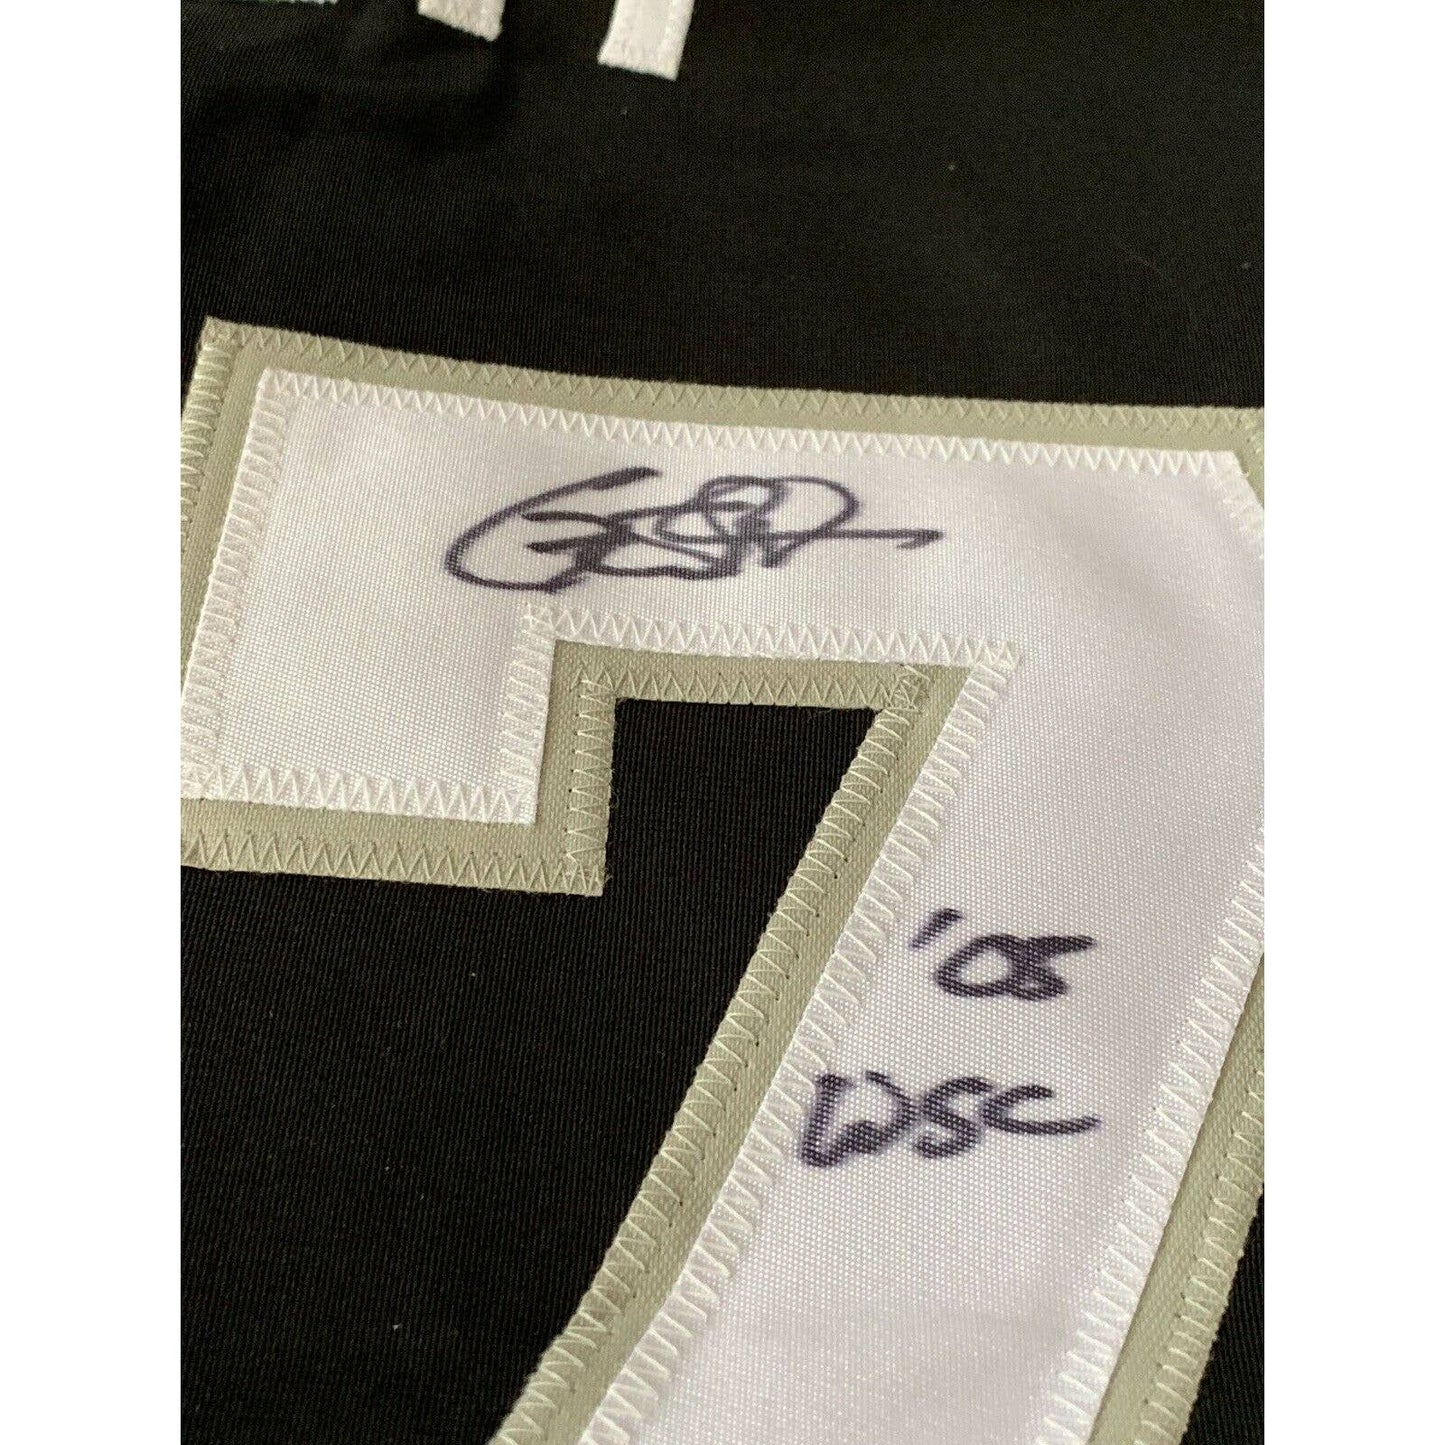 Geoff Blum Autographed/Signed Jersey PSA/DNA COA Chicago White Sox - TreasuresEvolved